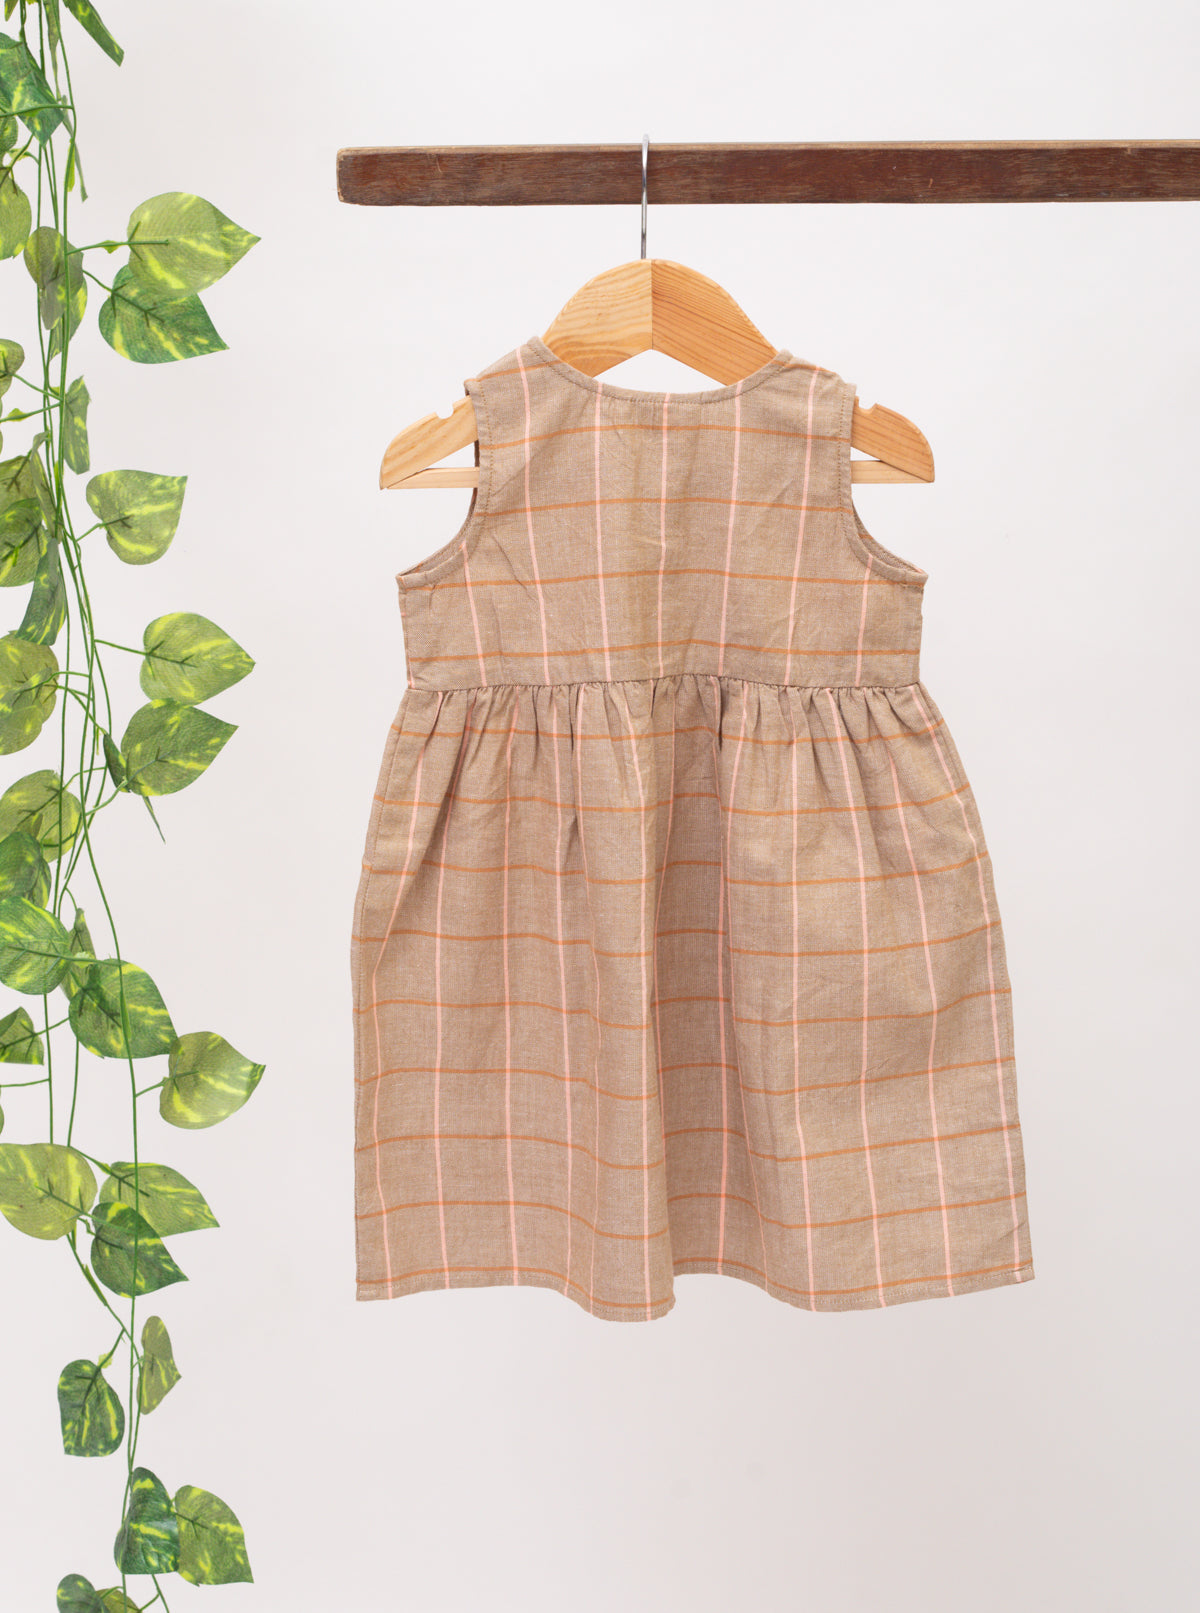 Jelly Checkered Print Dress for Kids